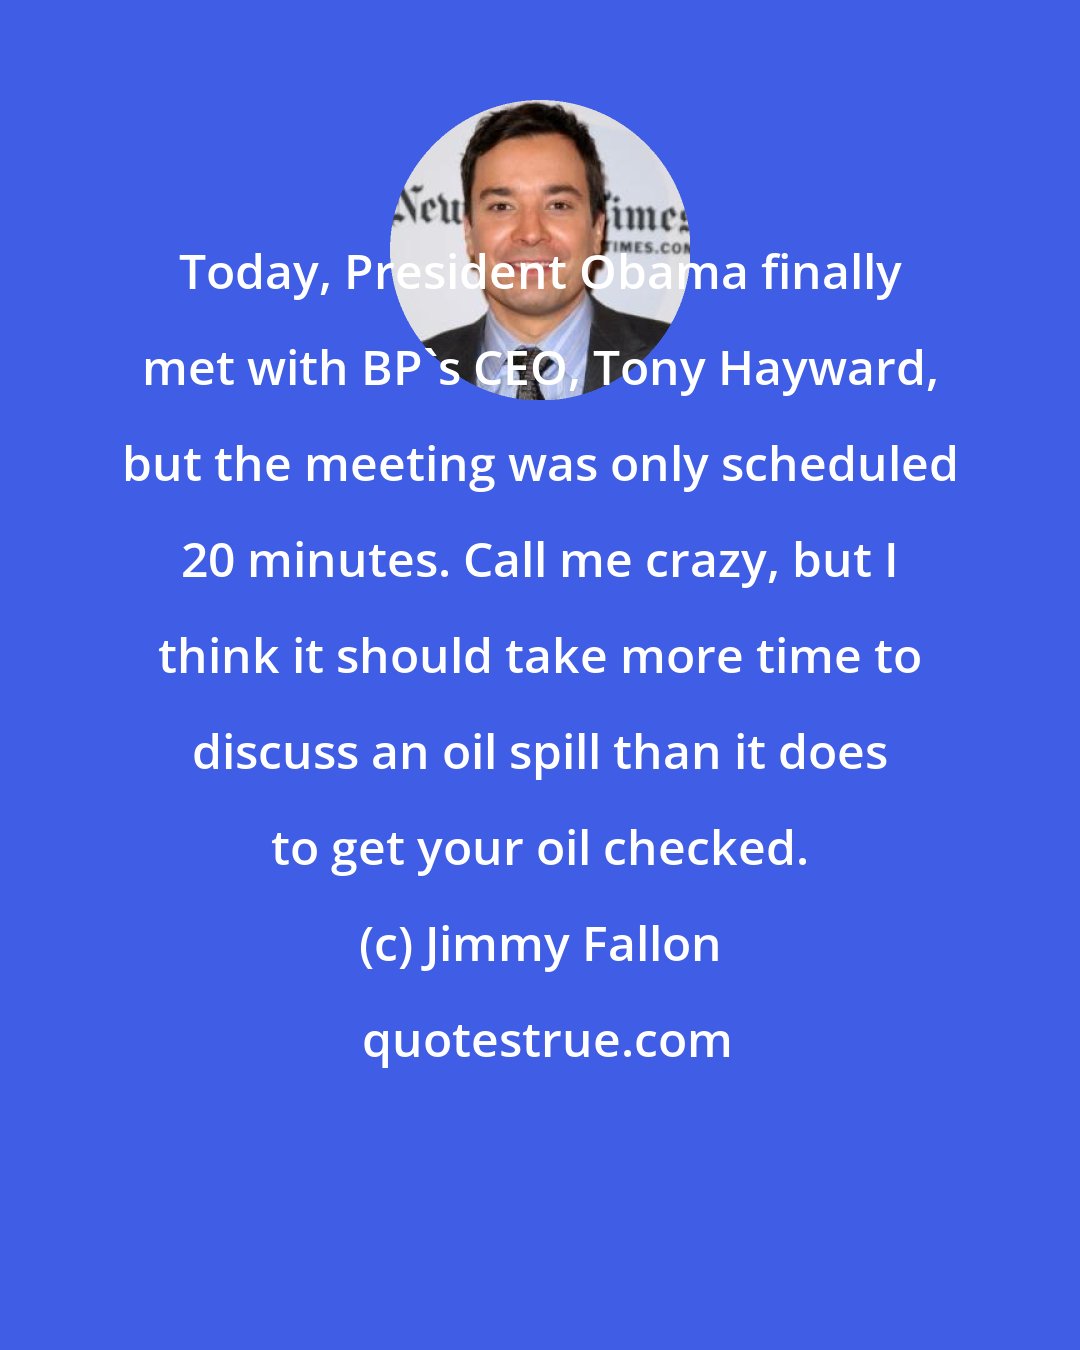 Jimmy Fallon: Today, President Obama finally met with BP's CEO, Tony Hayward, but the meeting was only scheduled 20 minutes. Call me crazy, but I think it should take more time to discuss an oil spill than it does to get your oil checked.